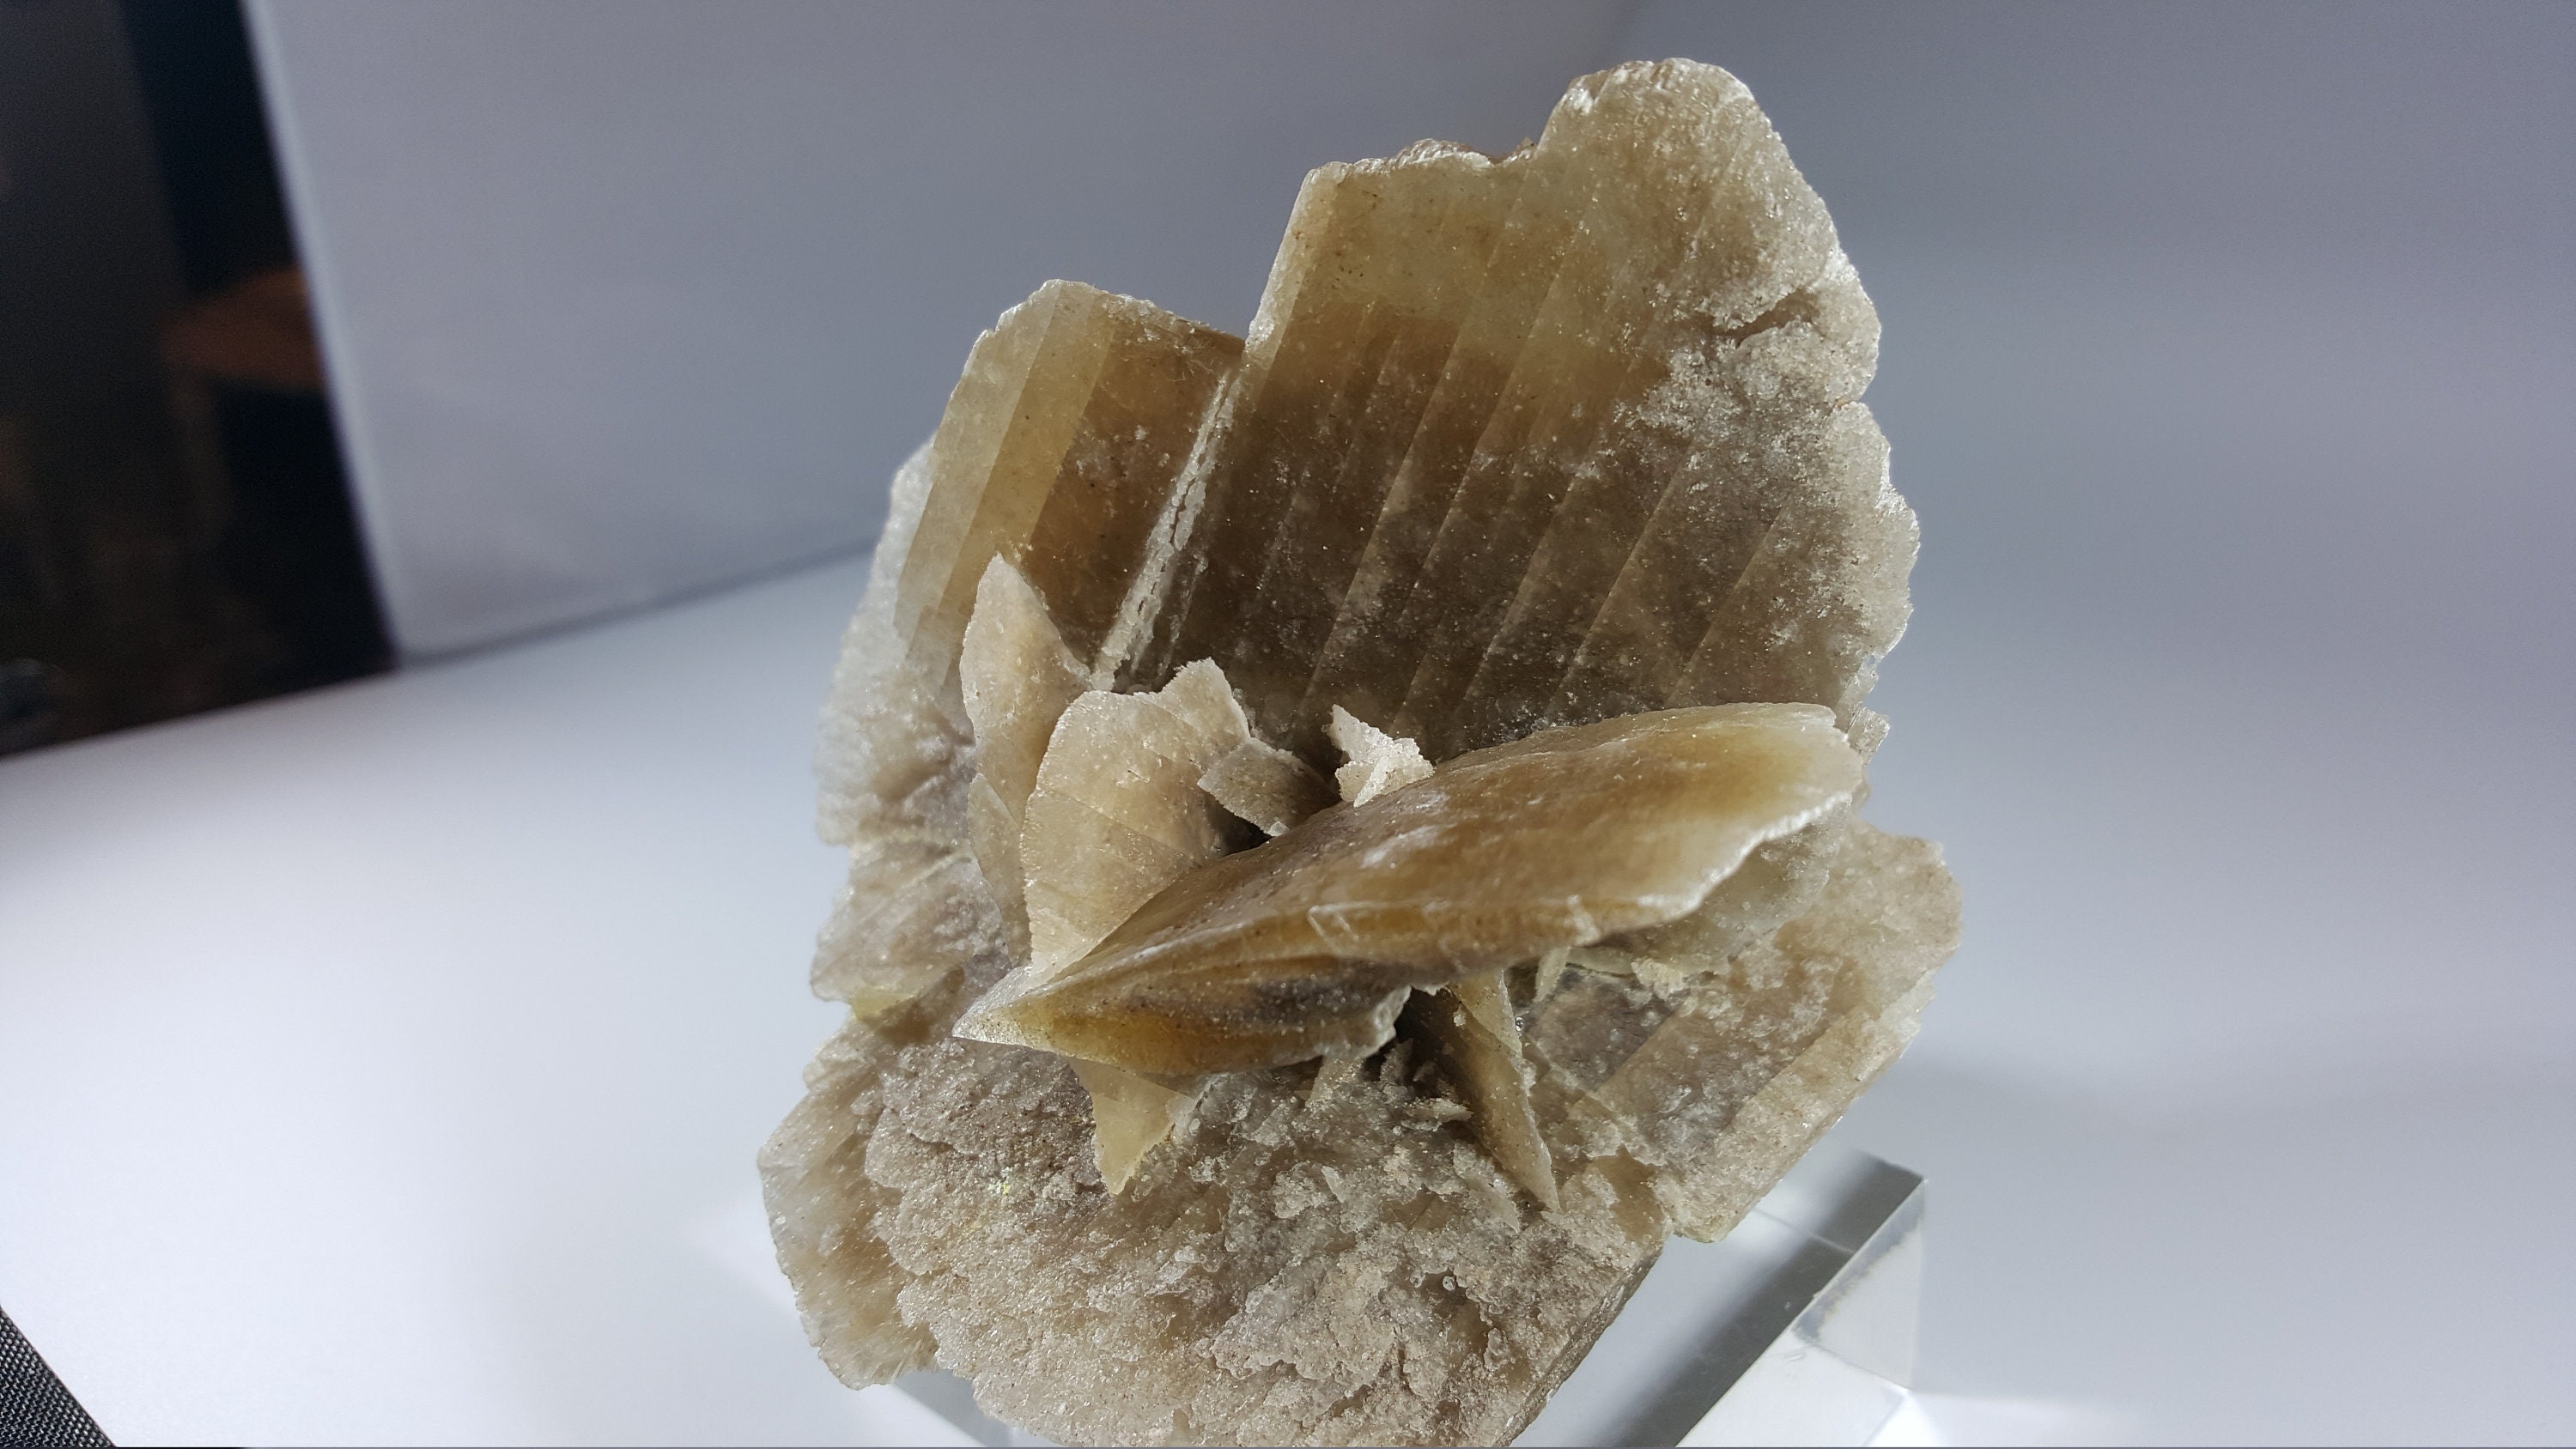 Mexico. 159 g Selenite crystals on Ganges